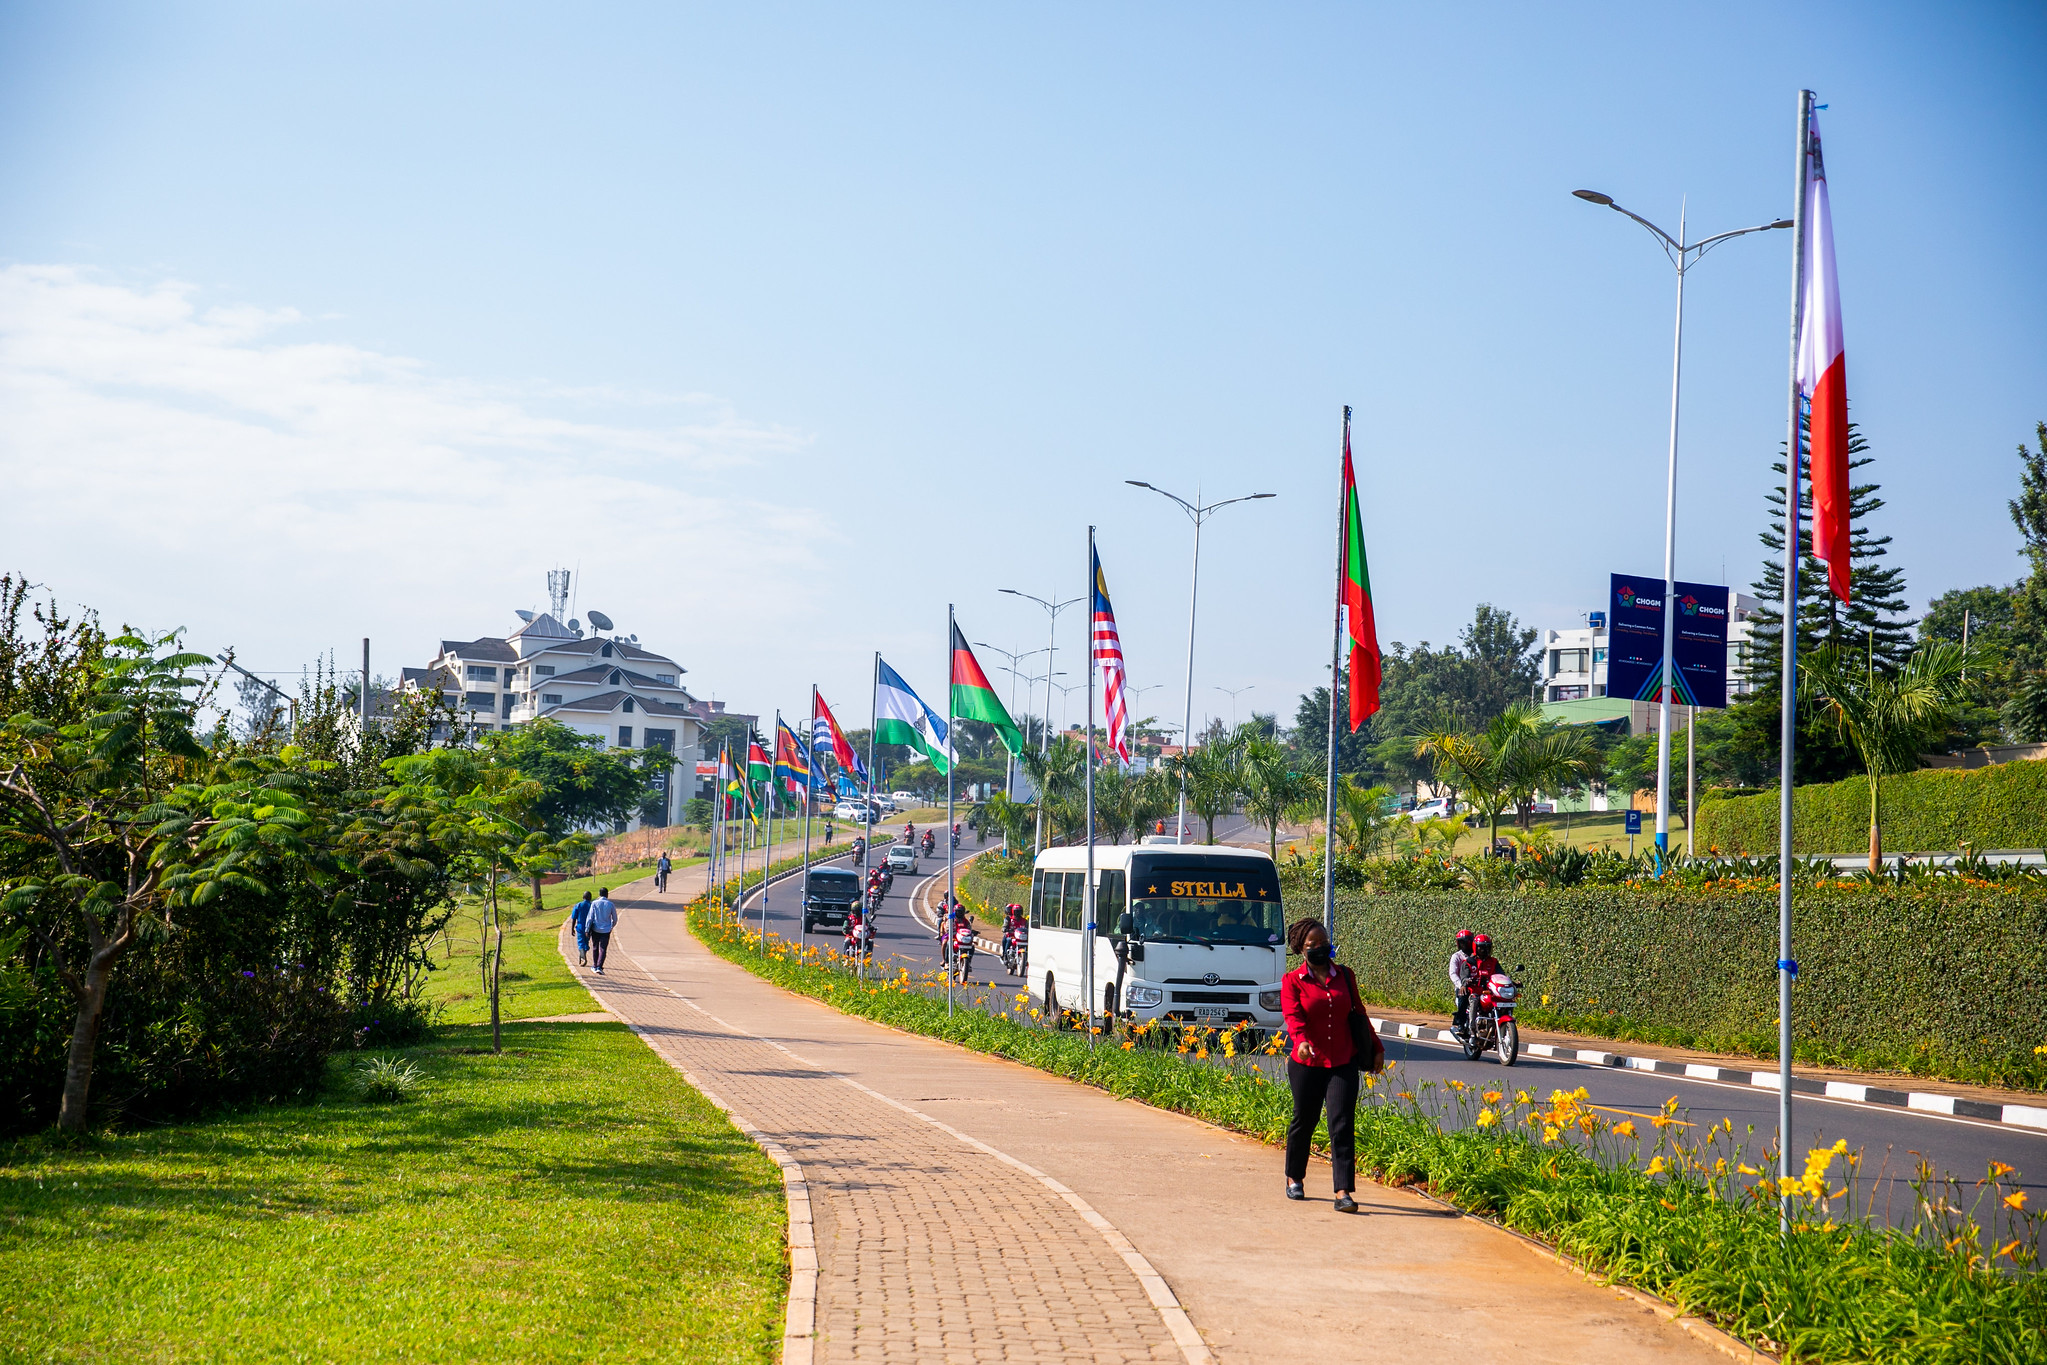 A view of Airport Road at Kimihurura with flags of different countries of the commonwealth. From June 16, some roads in Kigali will be closed to allow smooth transportation of the attending delegates. 